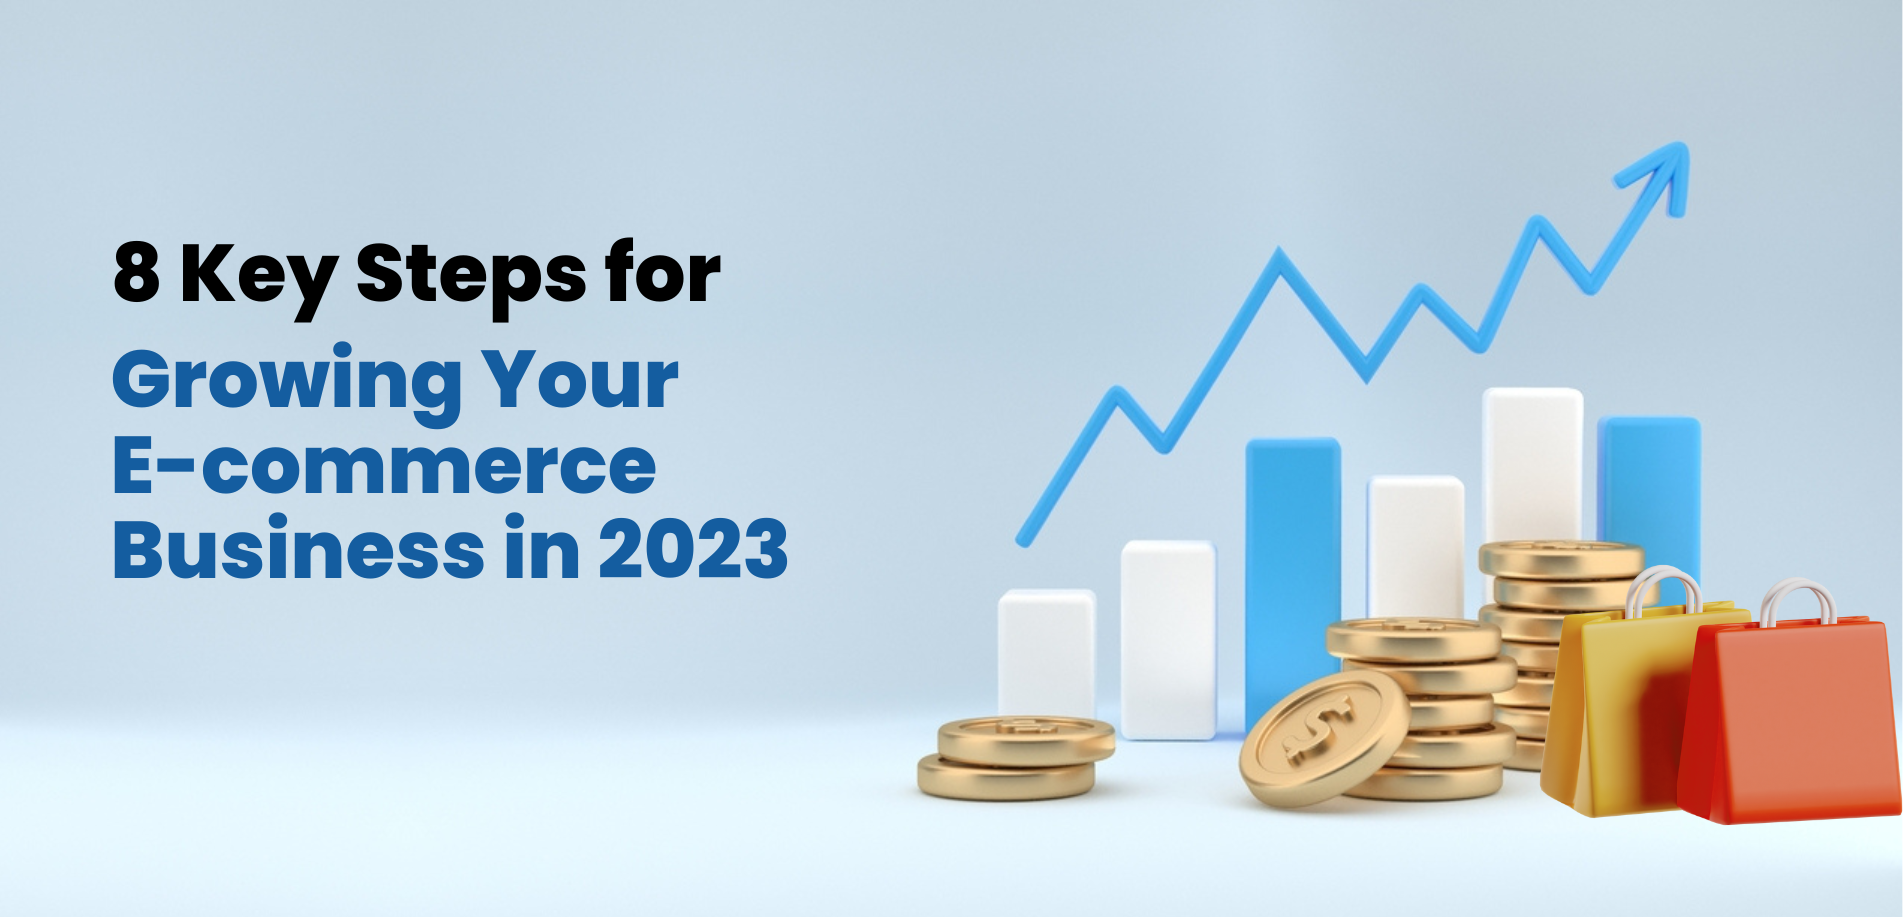 8 Key Steps for Growing Your E-commerce Business